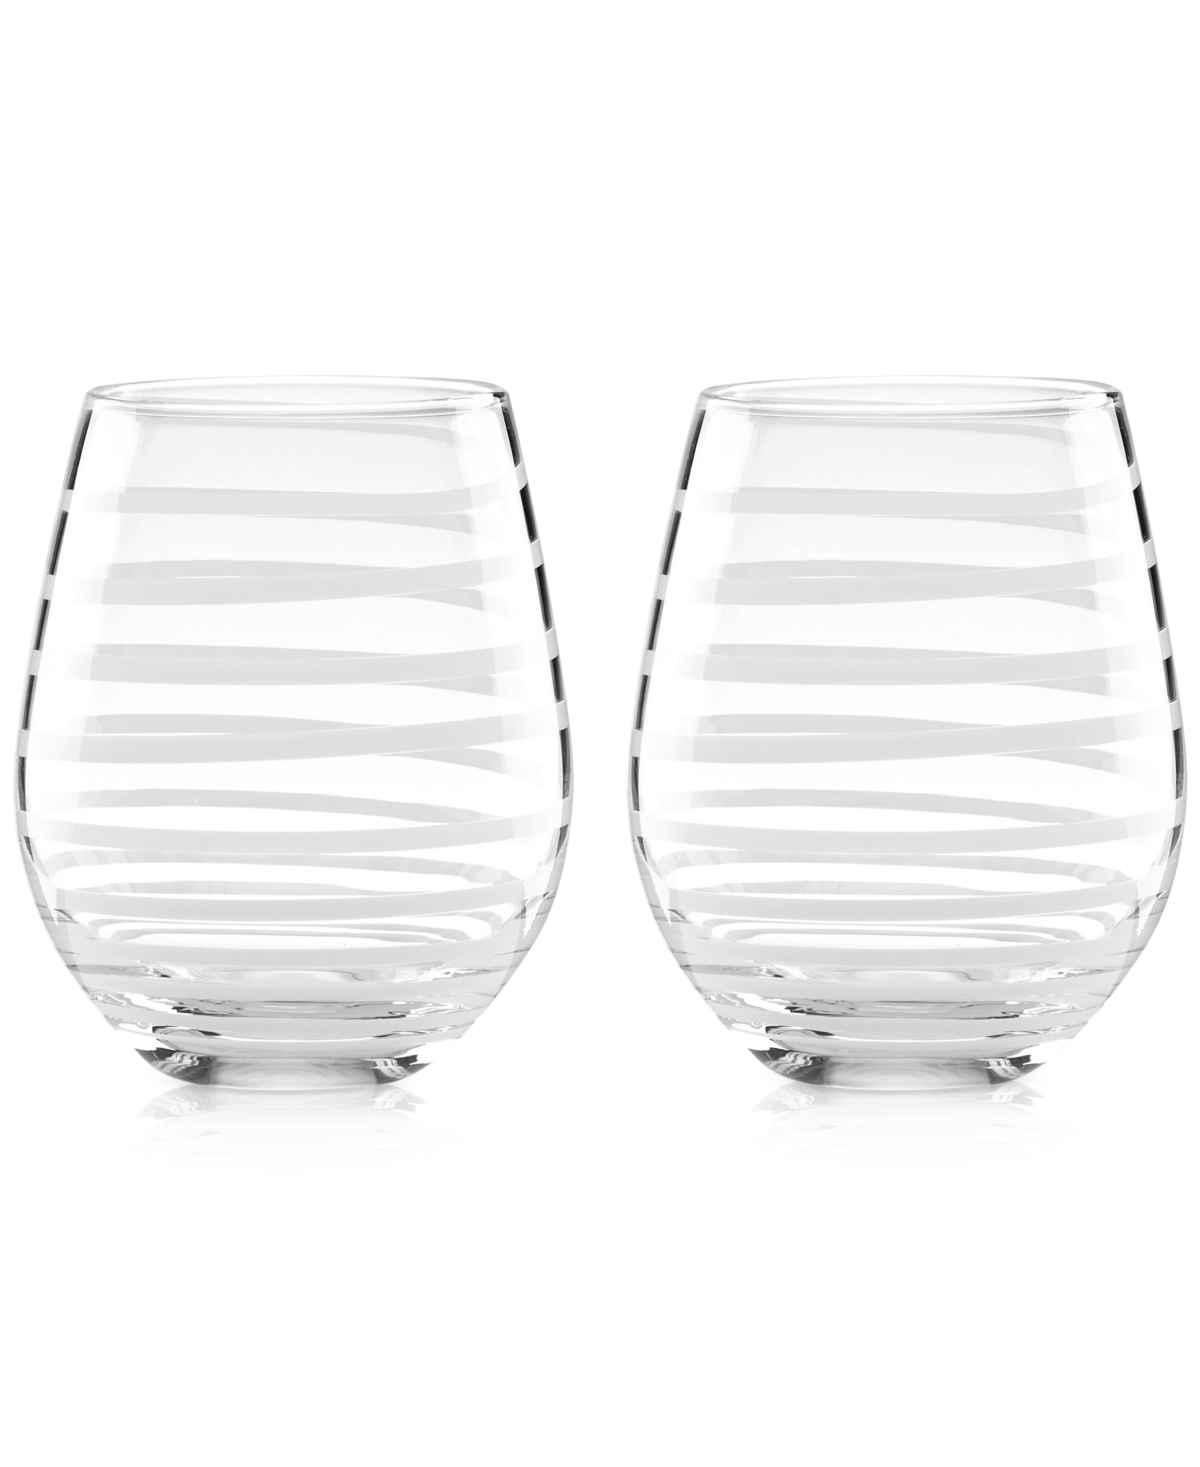 KATE SPADE KATE SPADE NEW YORK CHARLOTTE STREET COLLECTION 2-PC. STEMLESS WINE GLASSES SET